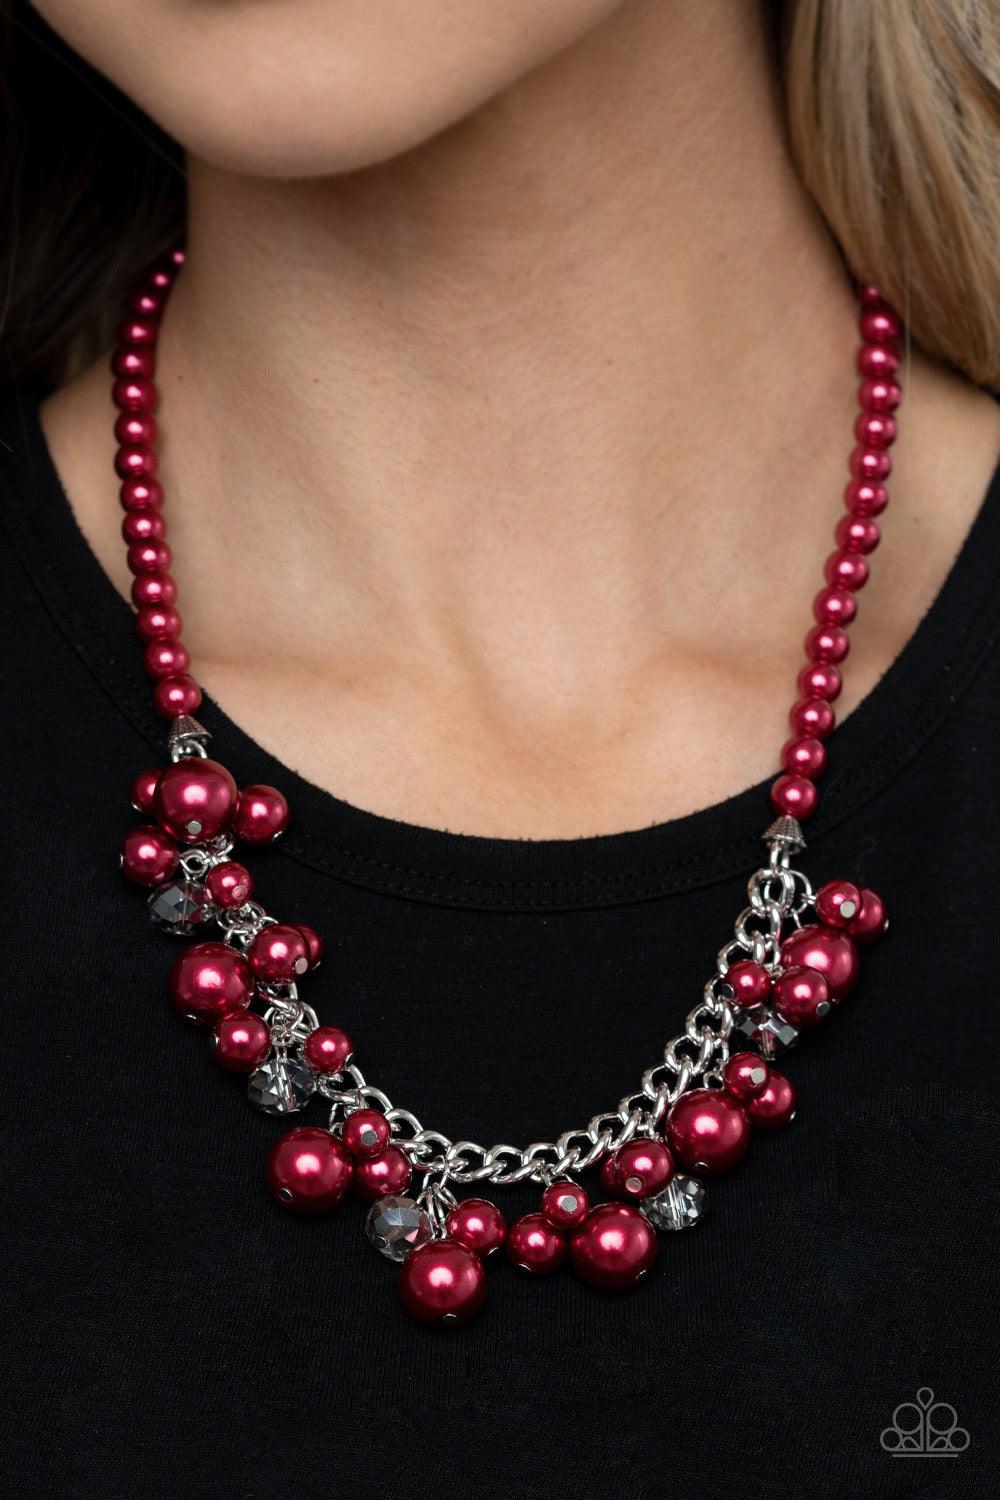 Paparazzi Accessories Prim And POLISHED - Red Threaded along an invisible wire, a pearly strand of red beads gives way to a section of chunky silver chain below the collar. Clusters of pearly red beads and smoky metallic-flecked crystals swing from the ch